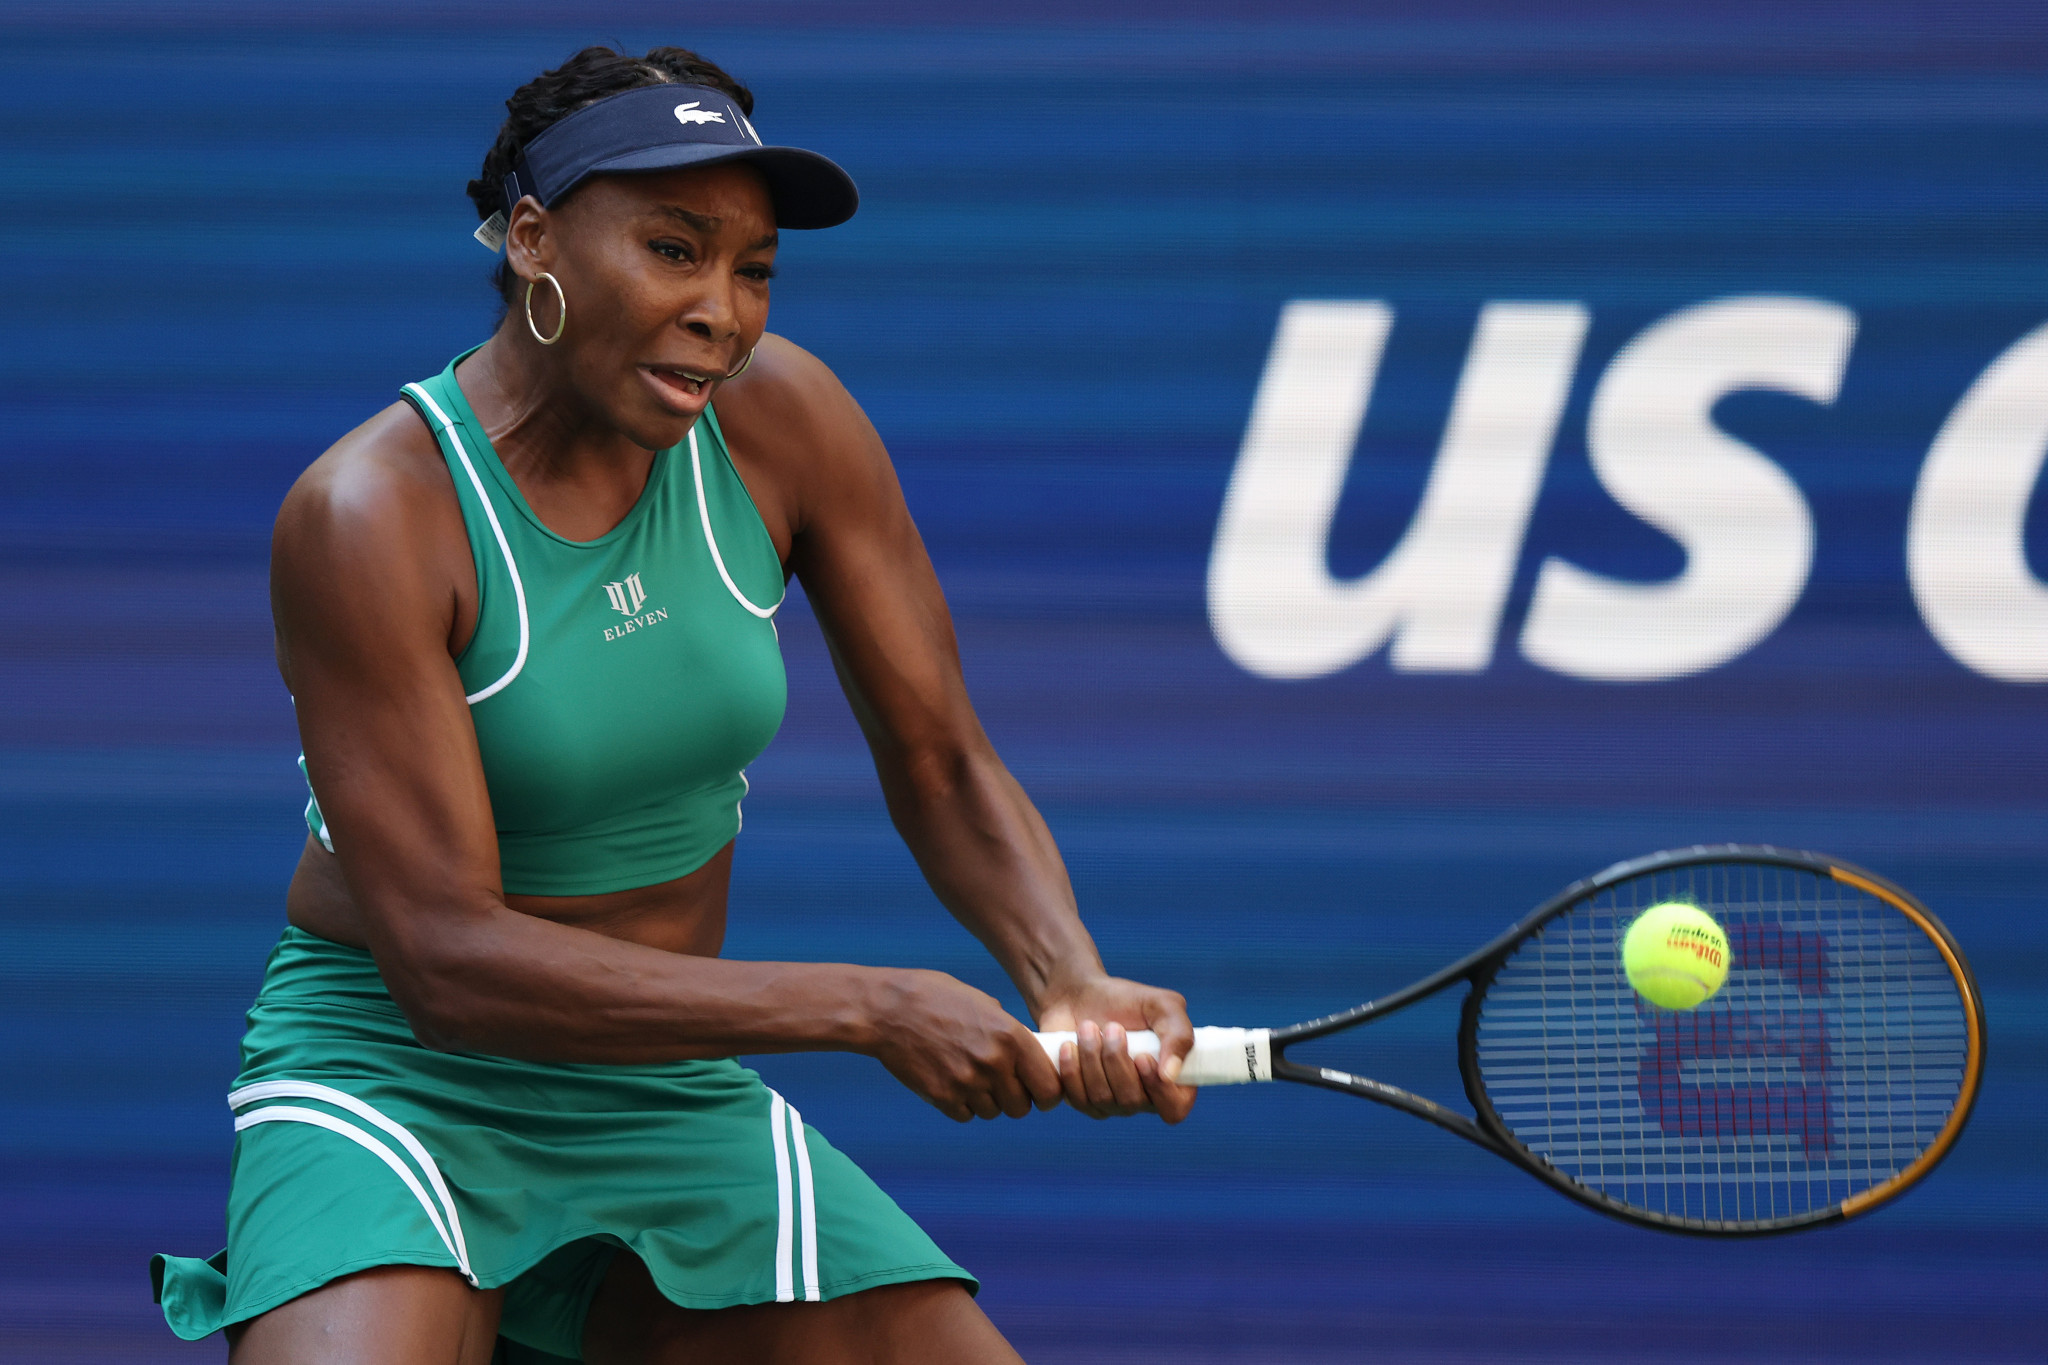 Venus Williams was non-committal on her future plans after a first-round defeat in the women's singles draw at the US Open ©Getty Images